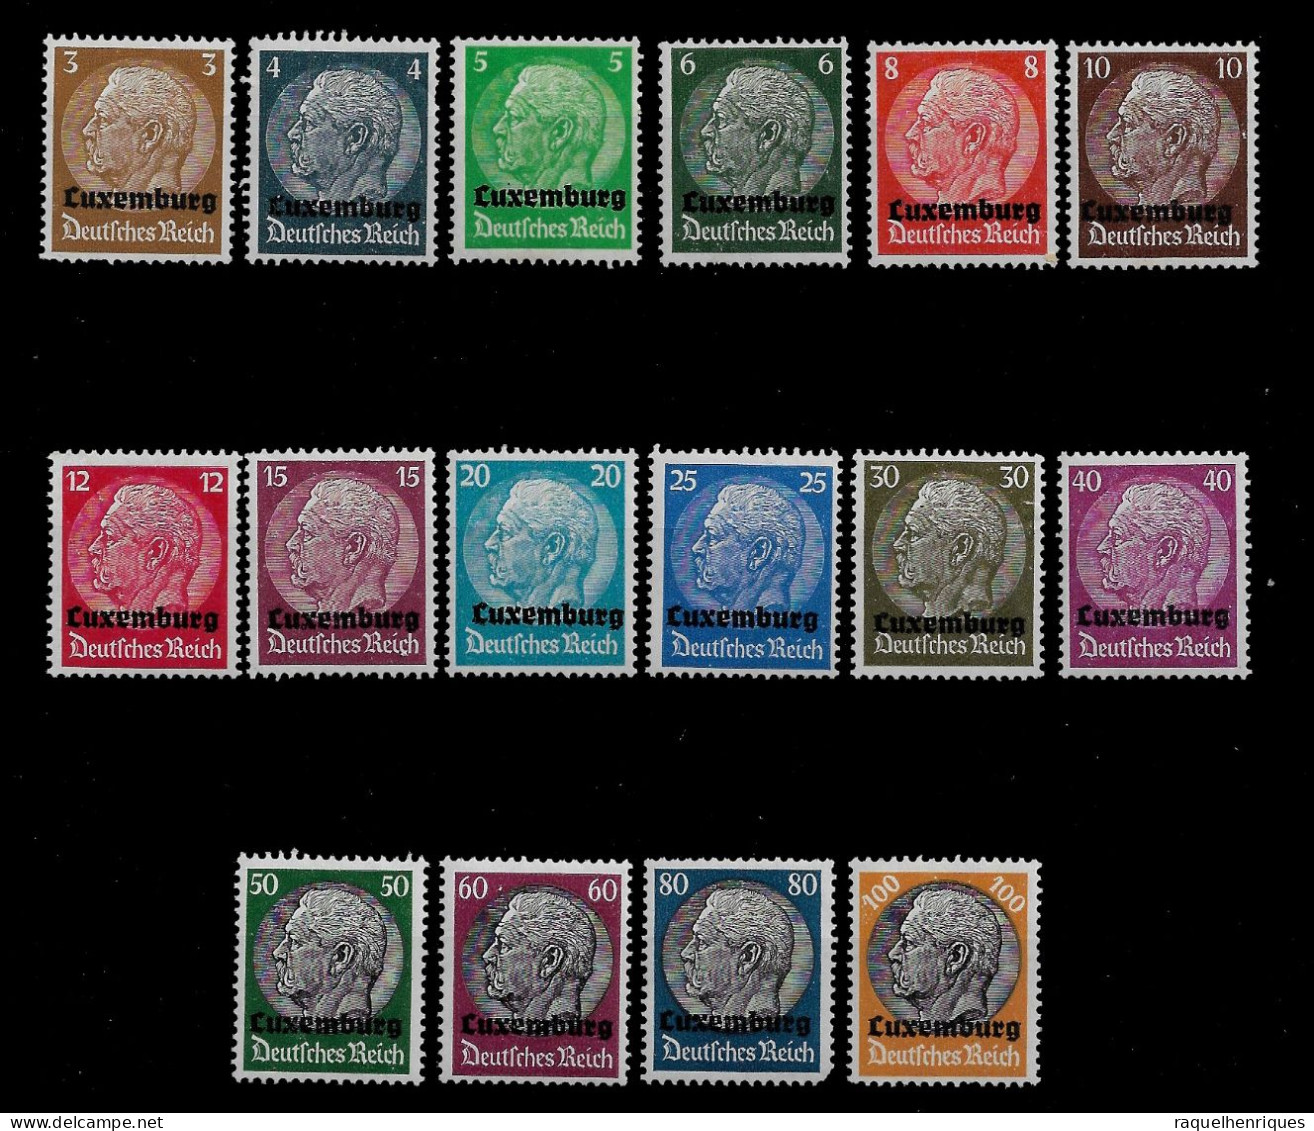 LUXEMBOURG GERMAN OCCUPATION - 1940 German Empire Postage Stamps Overprinted "Luxemburg" SET MNH (STB10-A05) - 1940-1944 Duitse Bezetting